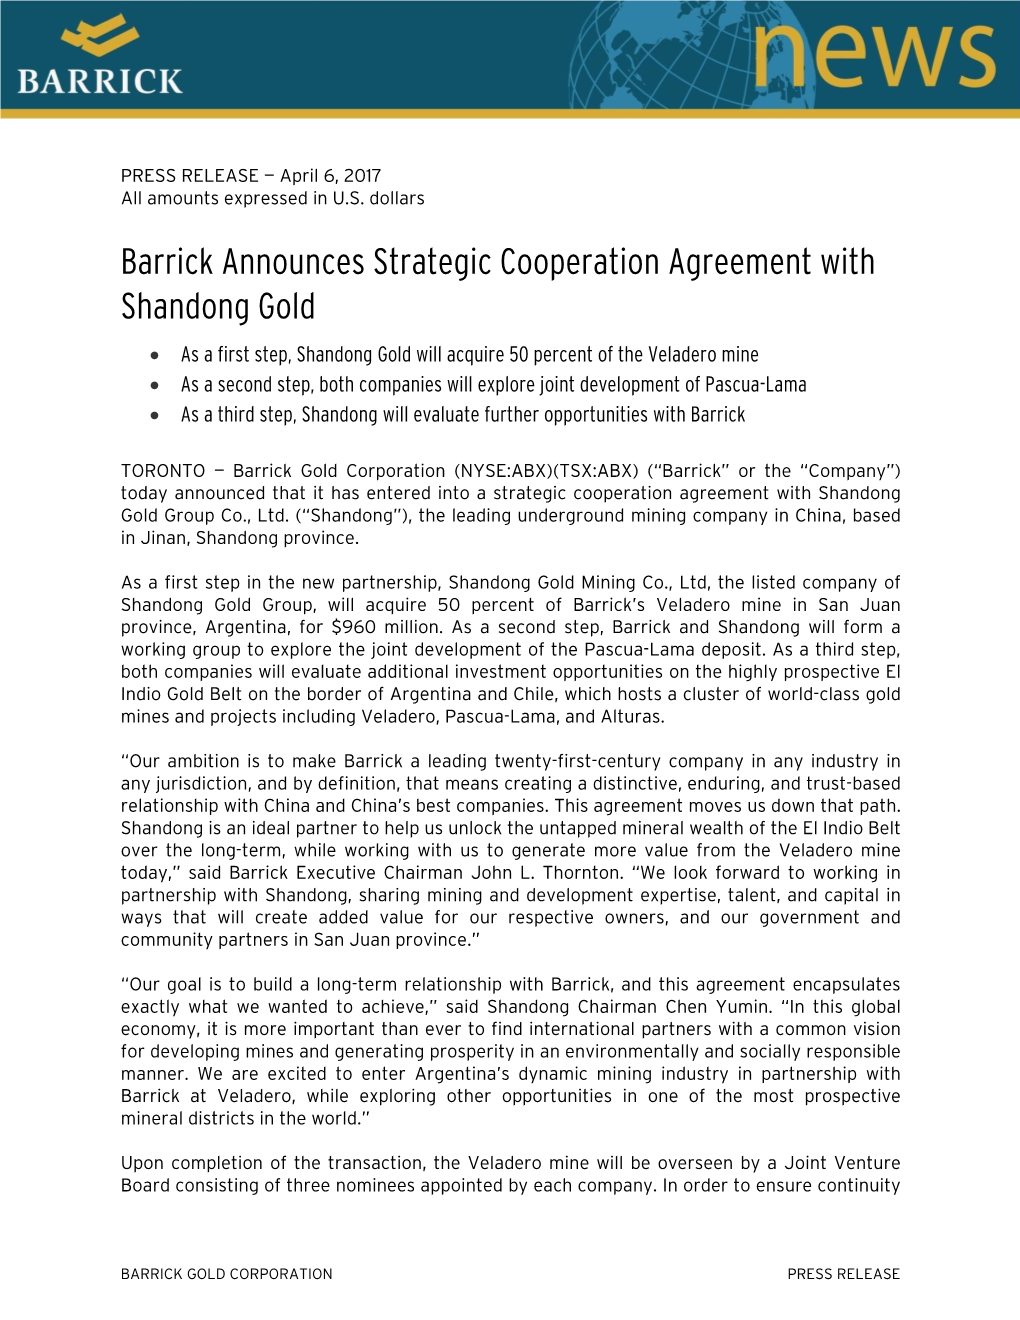 Barrick Announces Strategic Cooperation Agreement with Shandong Gold